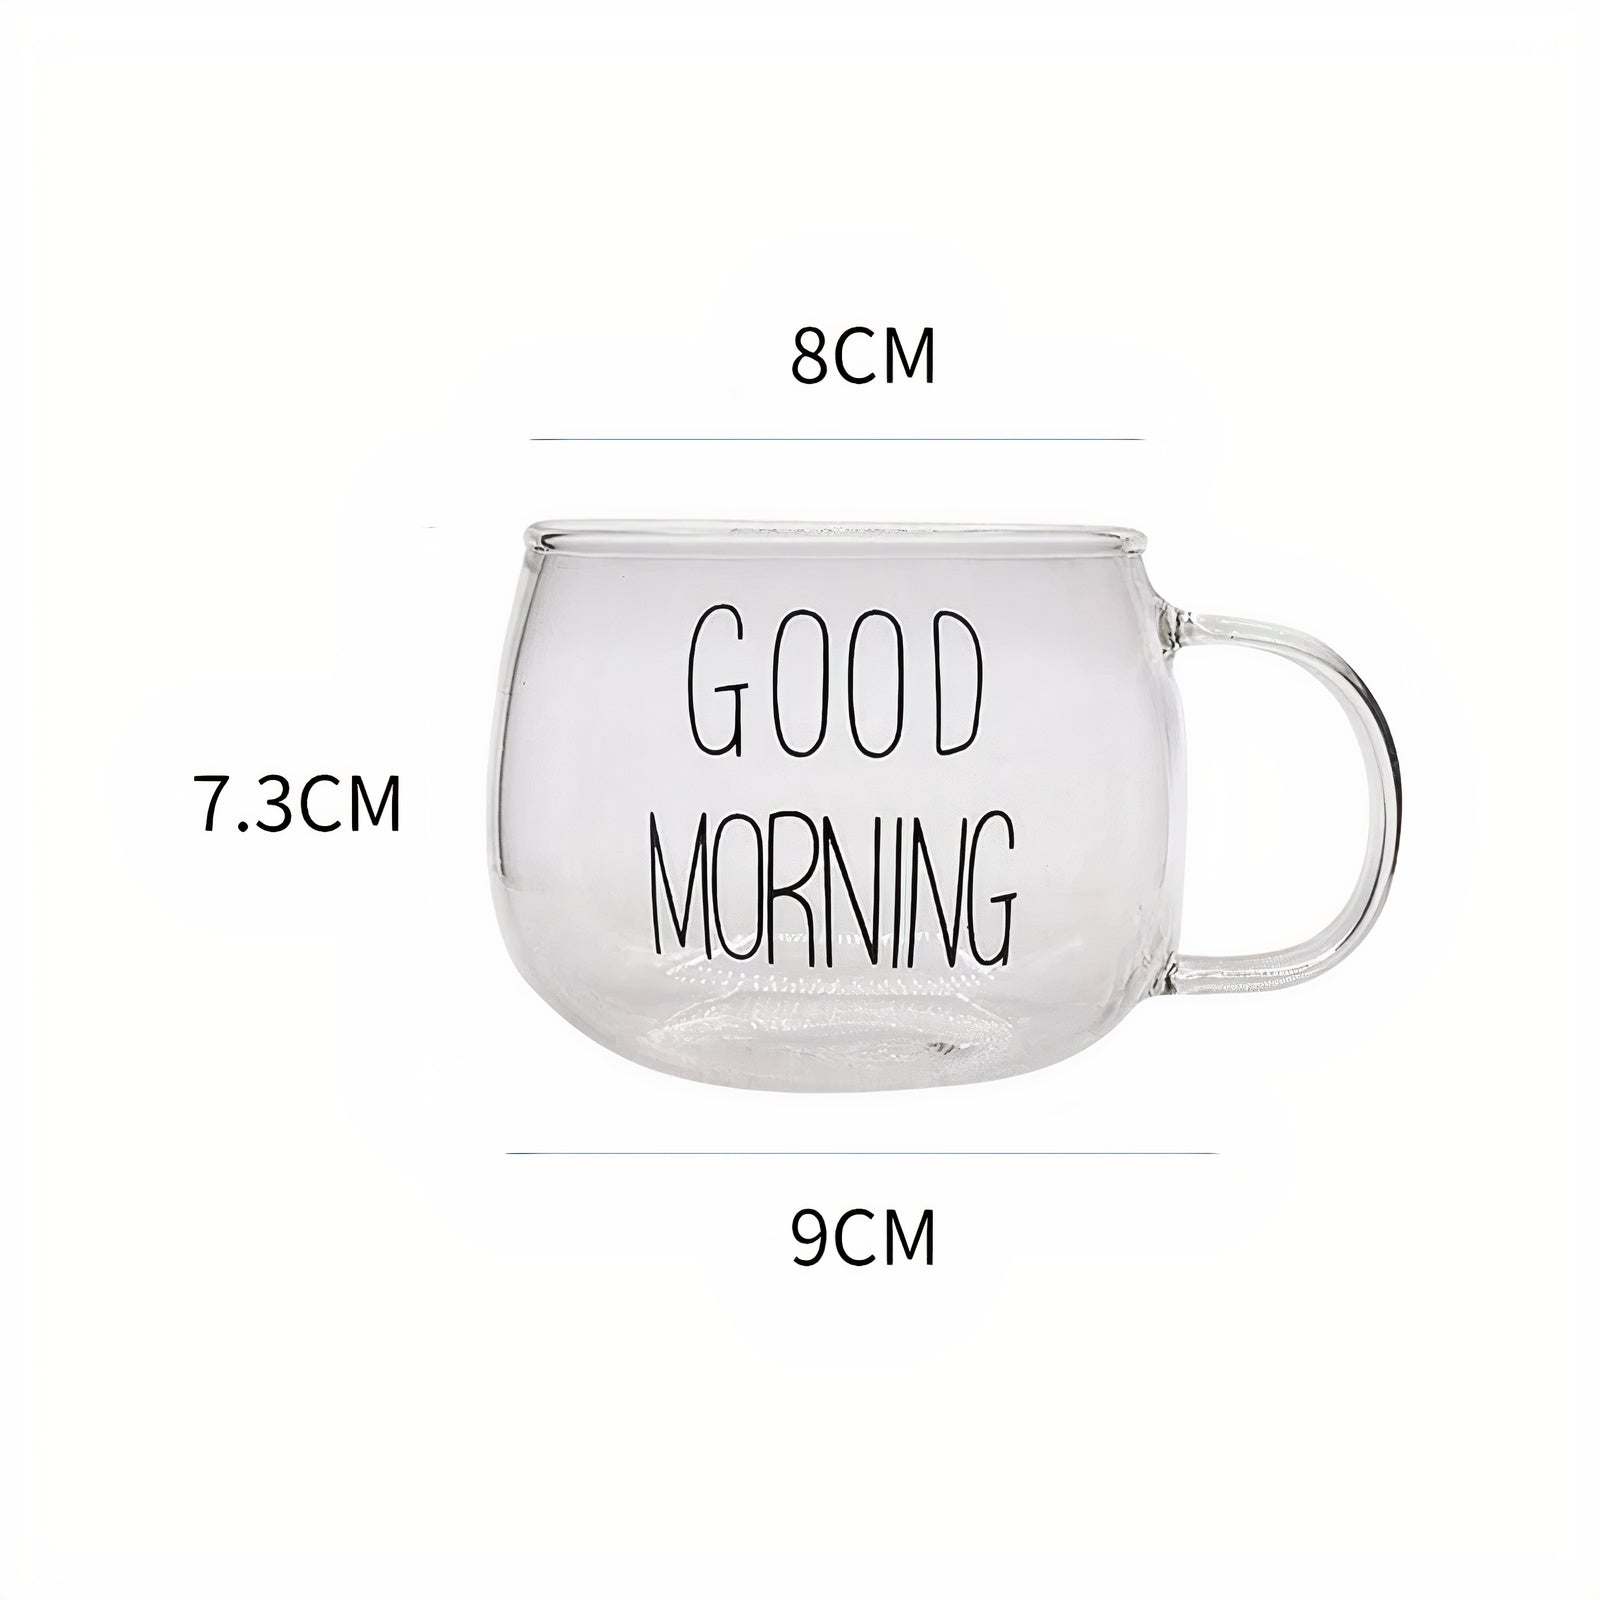 Good morning cup